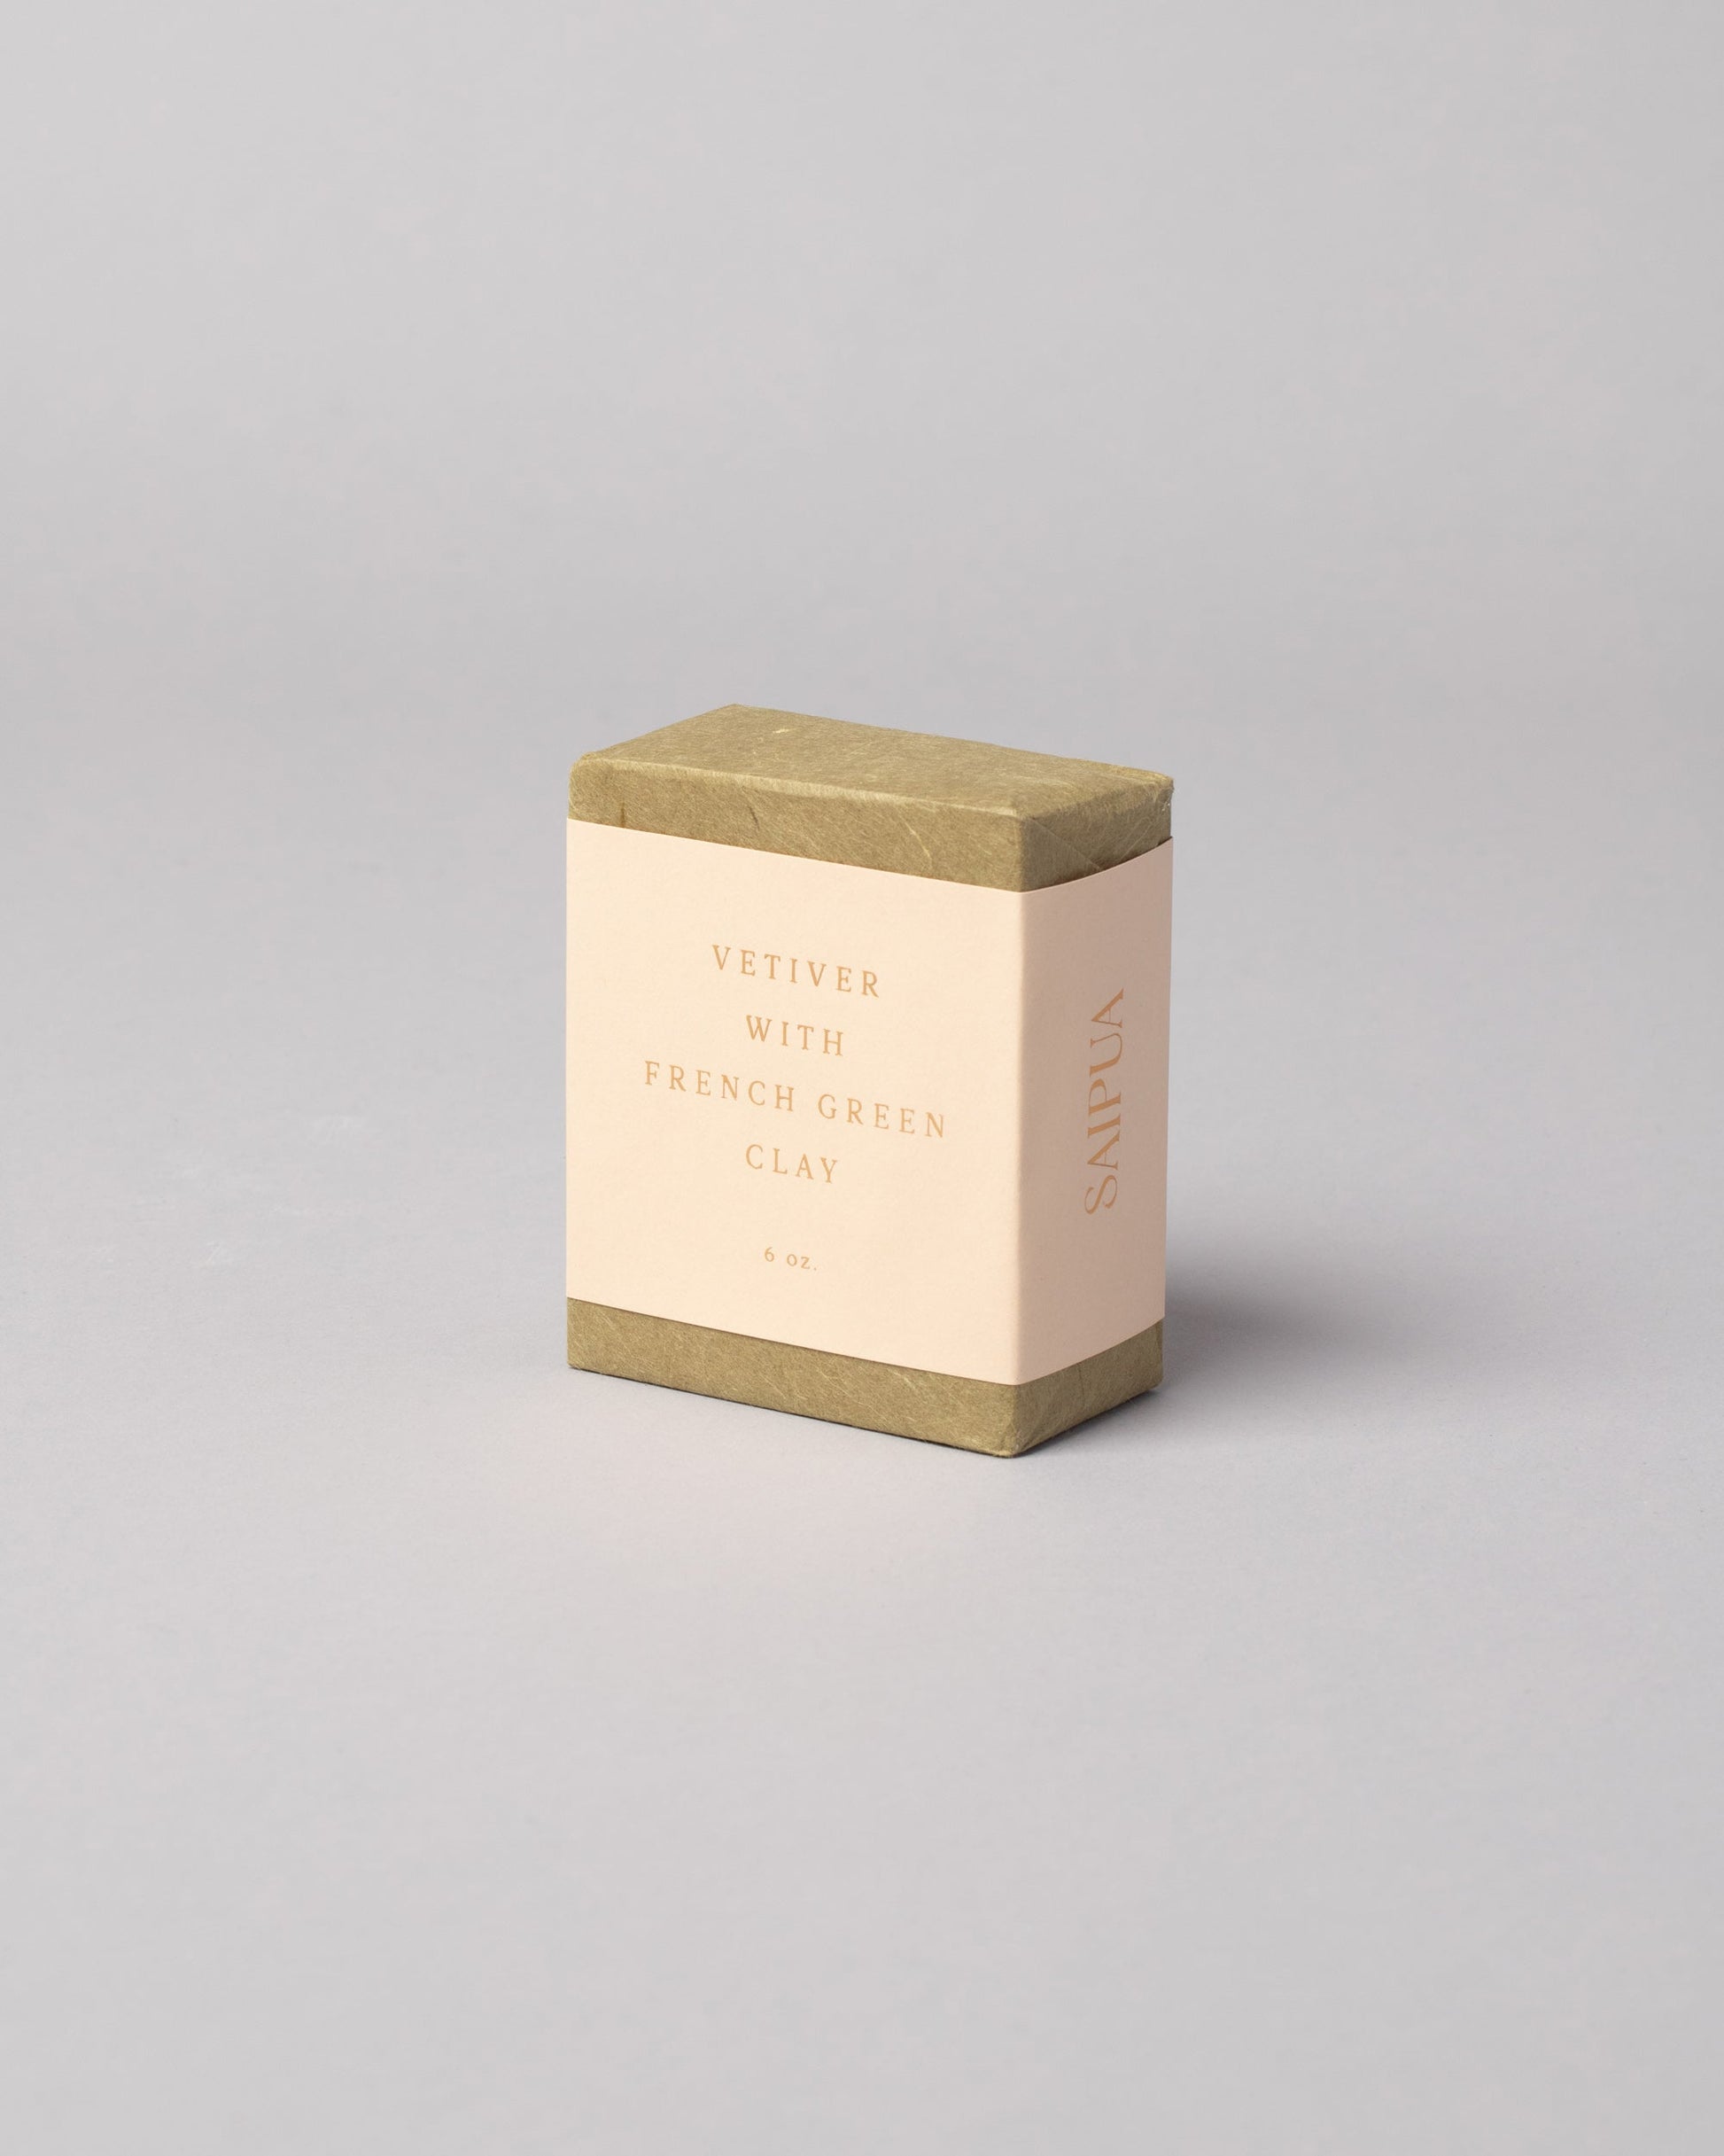 Saipua Vetiver with French Green Clay Soap on light color background.